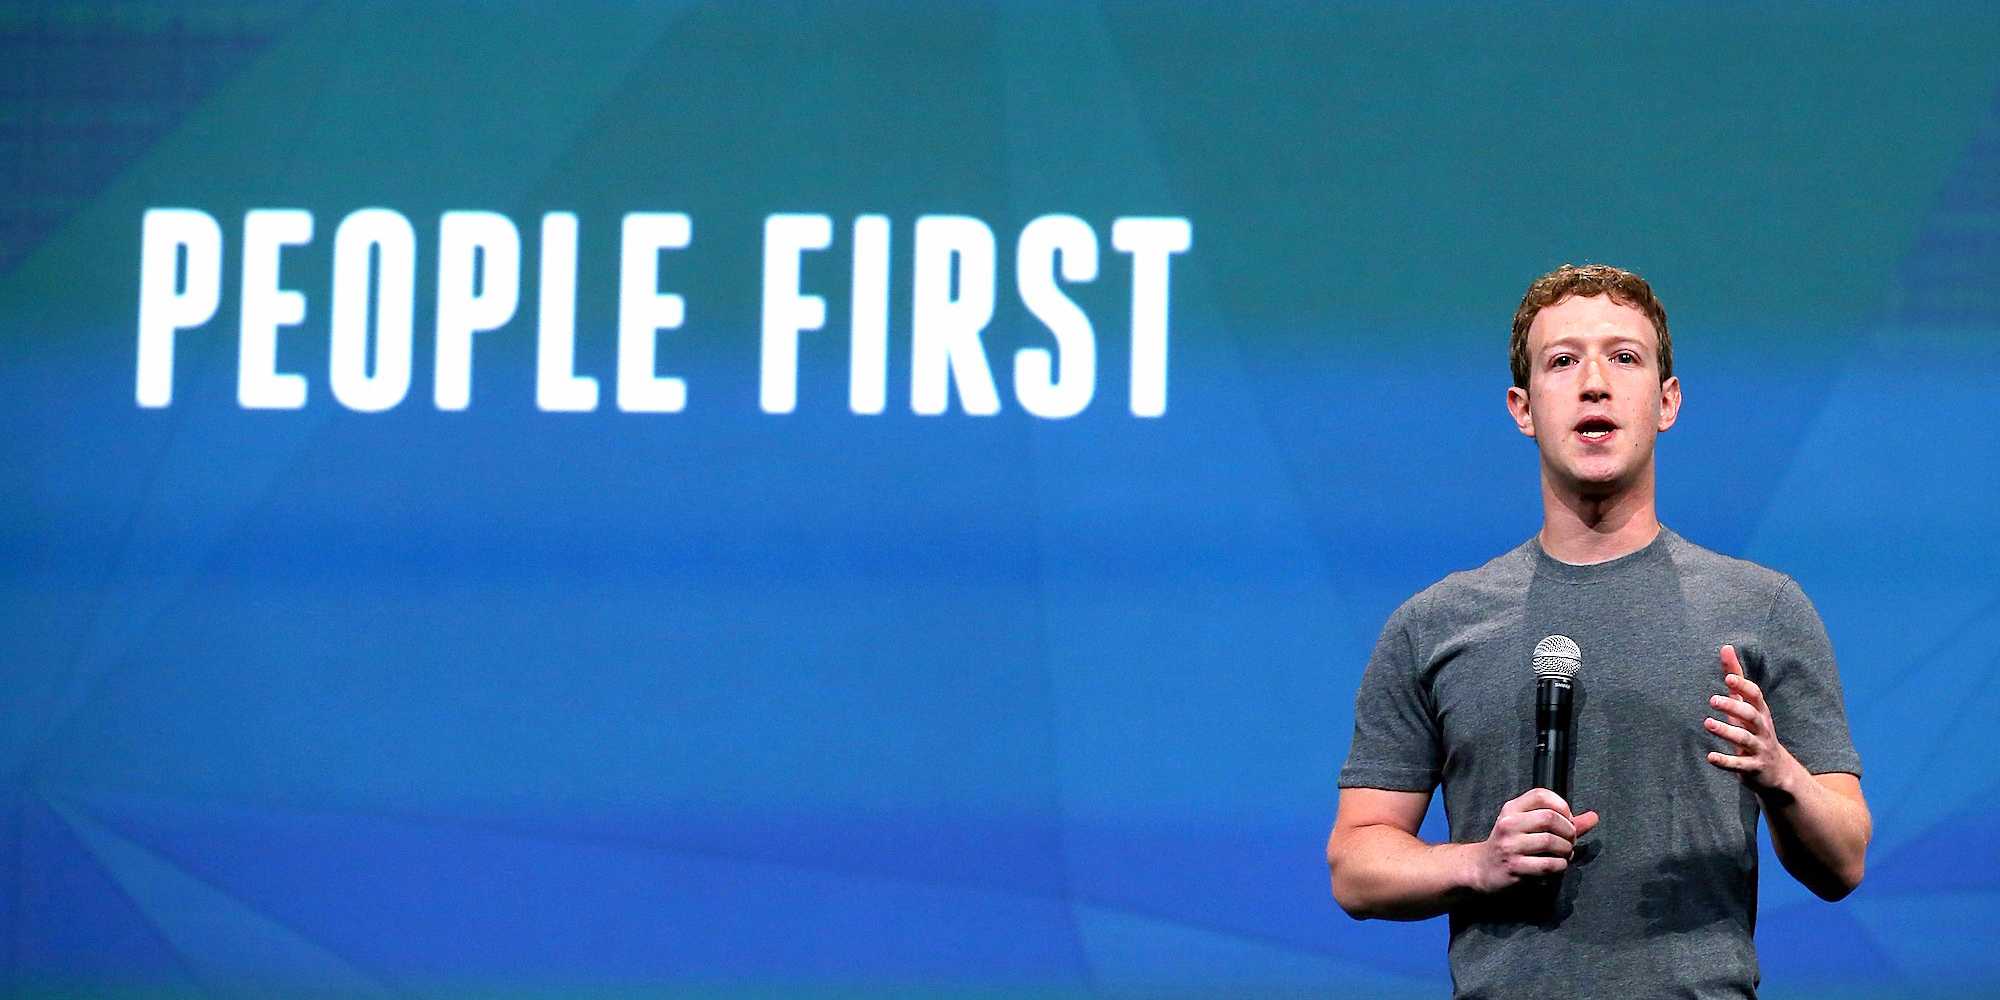 mark-zuckerberg-hopes-this-book-will-help-shape-his-vision-for-facebook